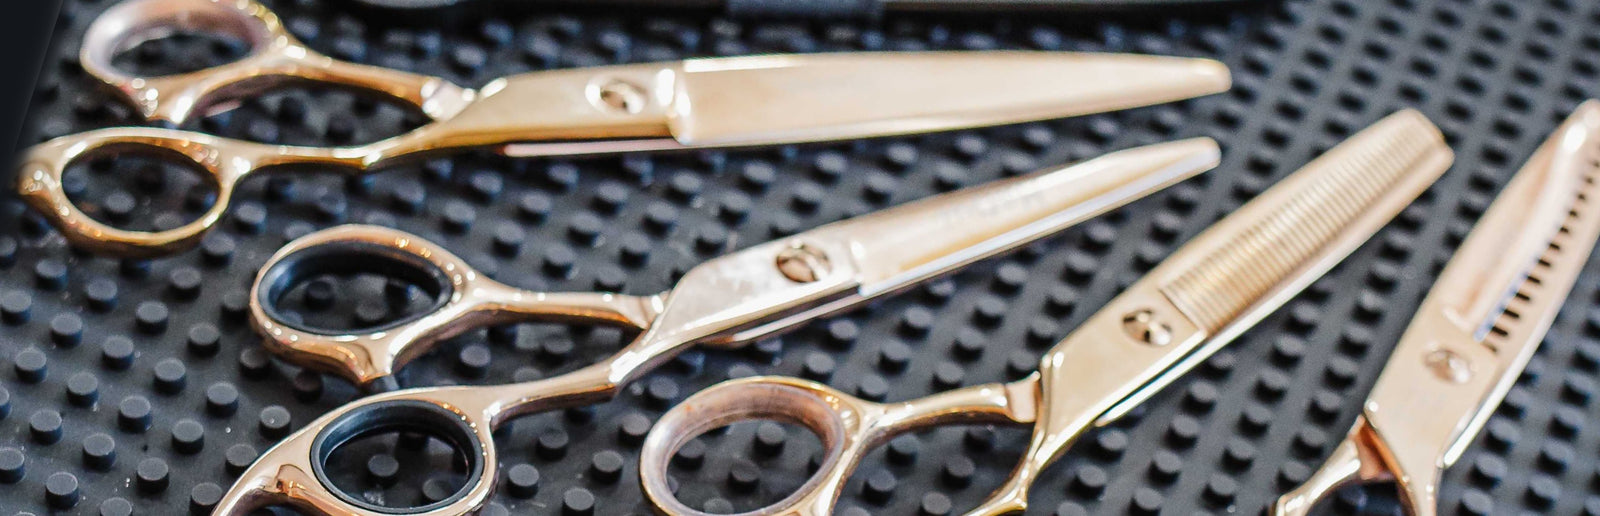 12 Best Hair Cutting Scissors in 2023, According to Experts